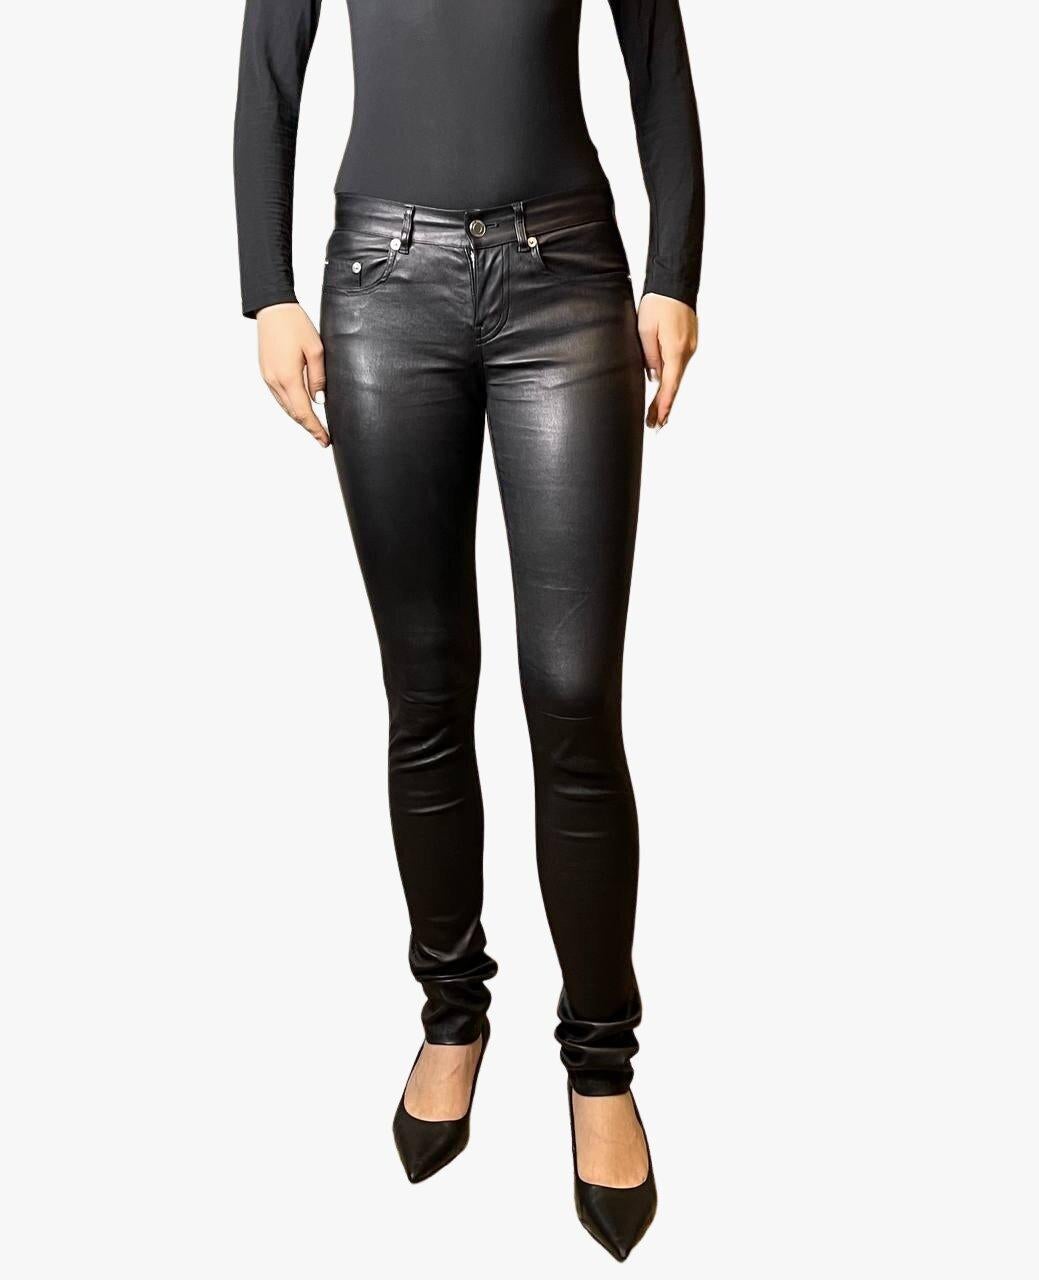 Yves Saint Laurent Skinny Stretch Leather Pants, 2010s

Yves Saint Lauren stretch leather skinny fit jeans.
Size: 36 Fr (XS)
Period: 2010s
Composition: 100$ lambskin, partially lined with cotton.
Length: 103cm
Condition: very good overall condition,